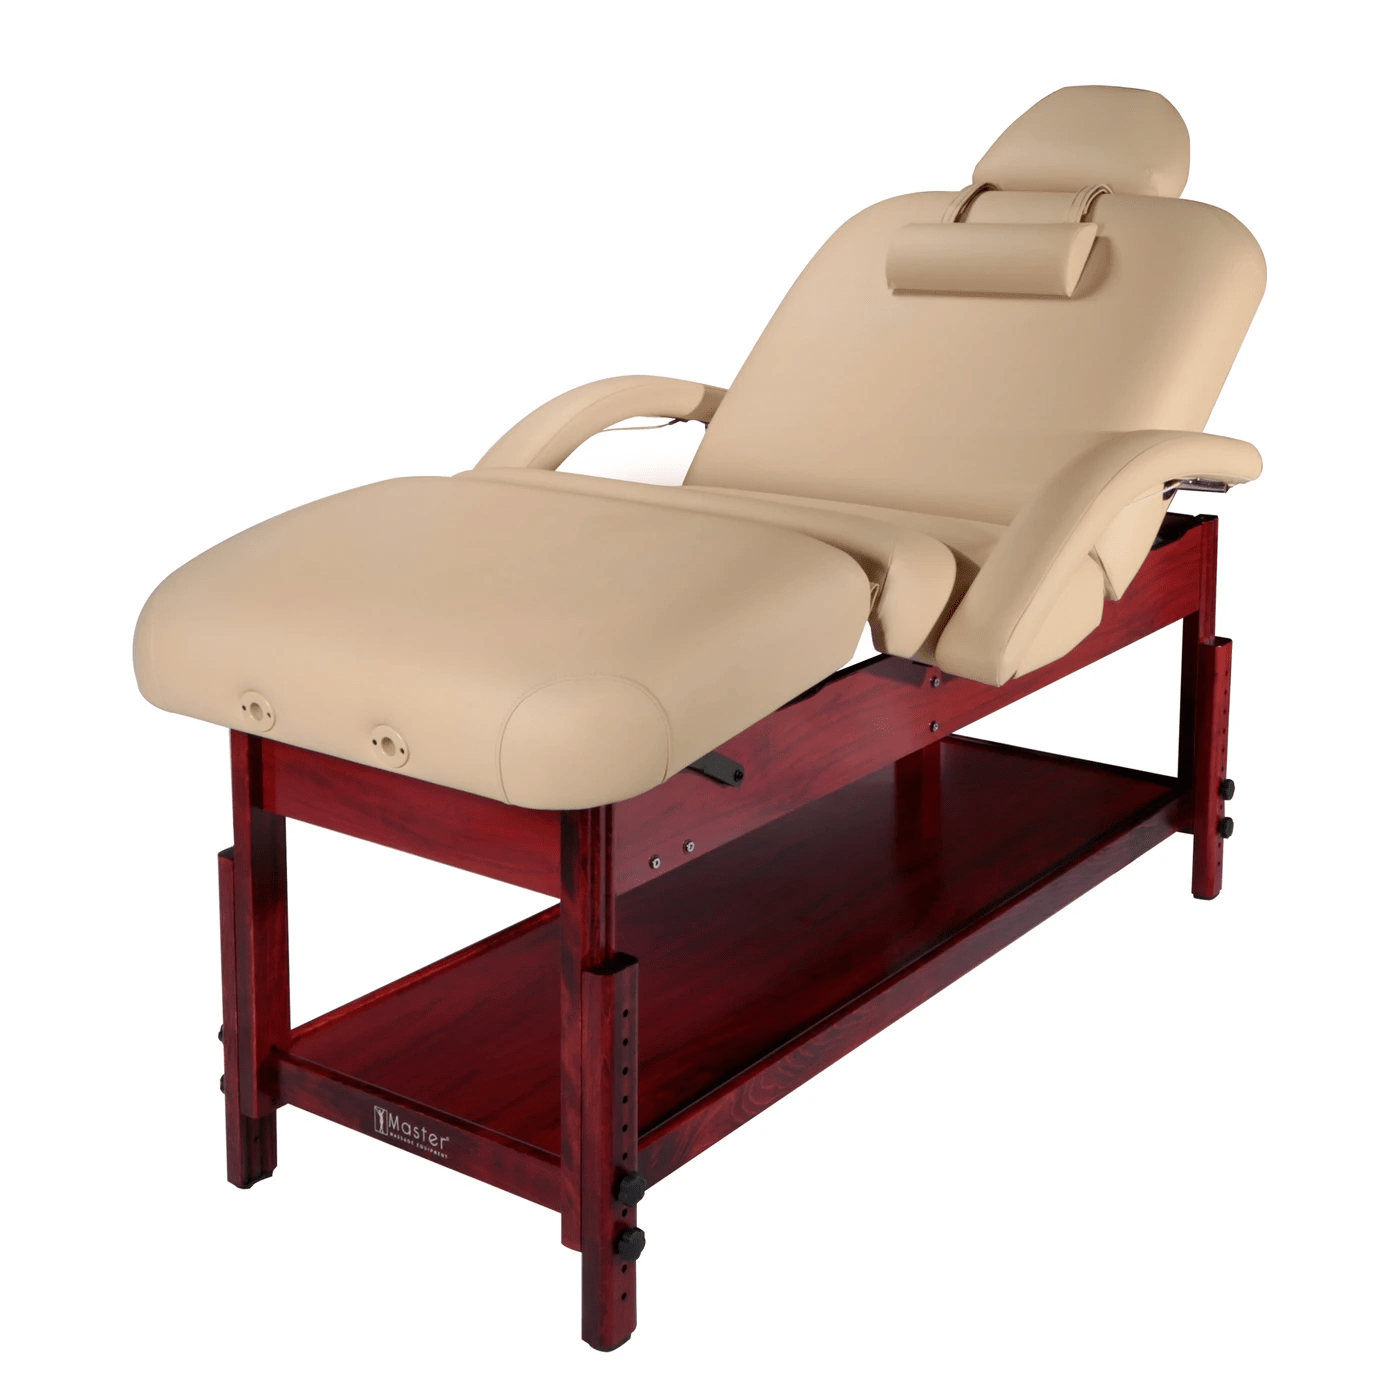 Master Massage Claudia 30" Spa Salon Beauty Bed with Pneumatic Tilt Stationary Massage Table 10126